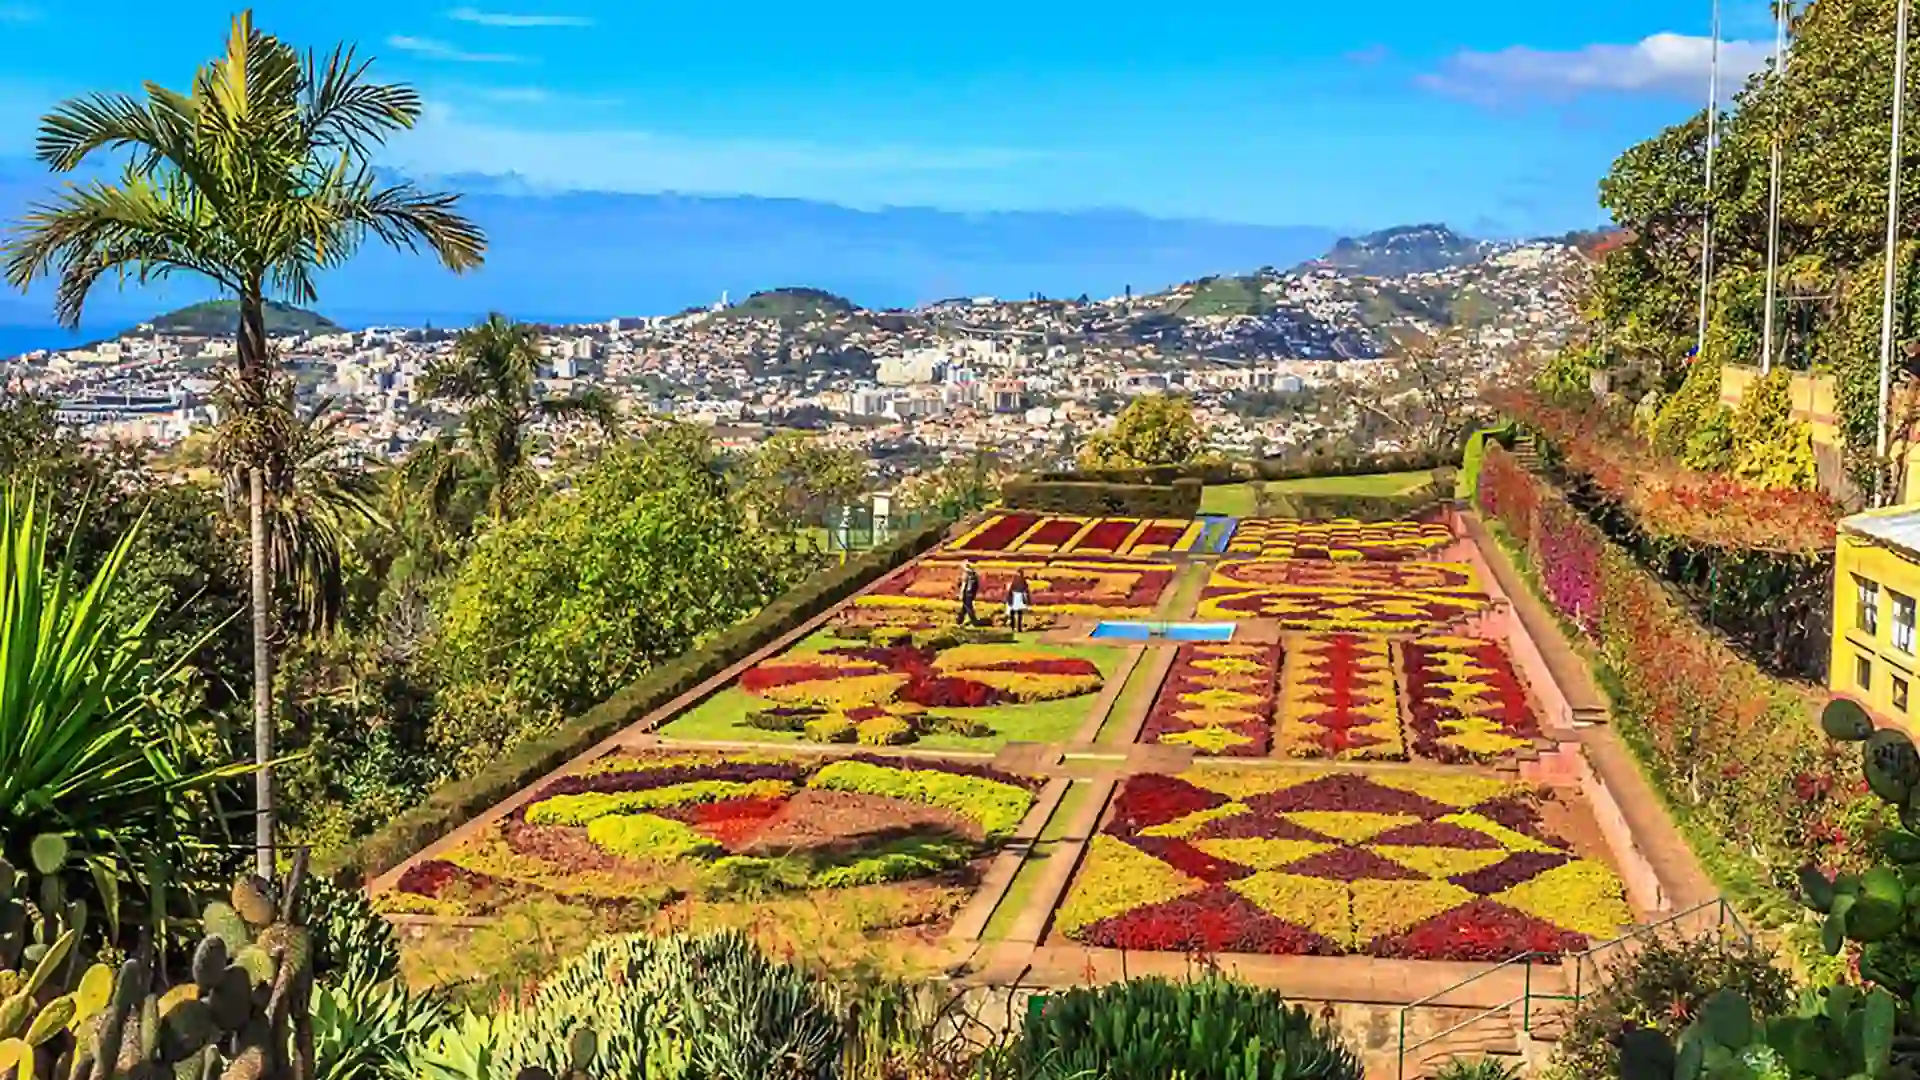 View of multicolored botanical gardens in Portugal surrounded by a green lush landscape.